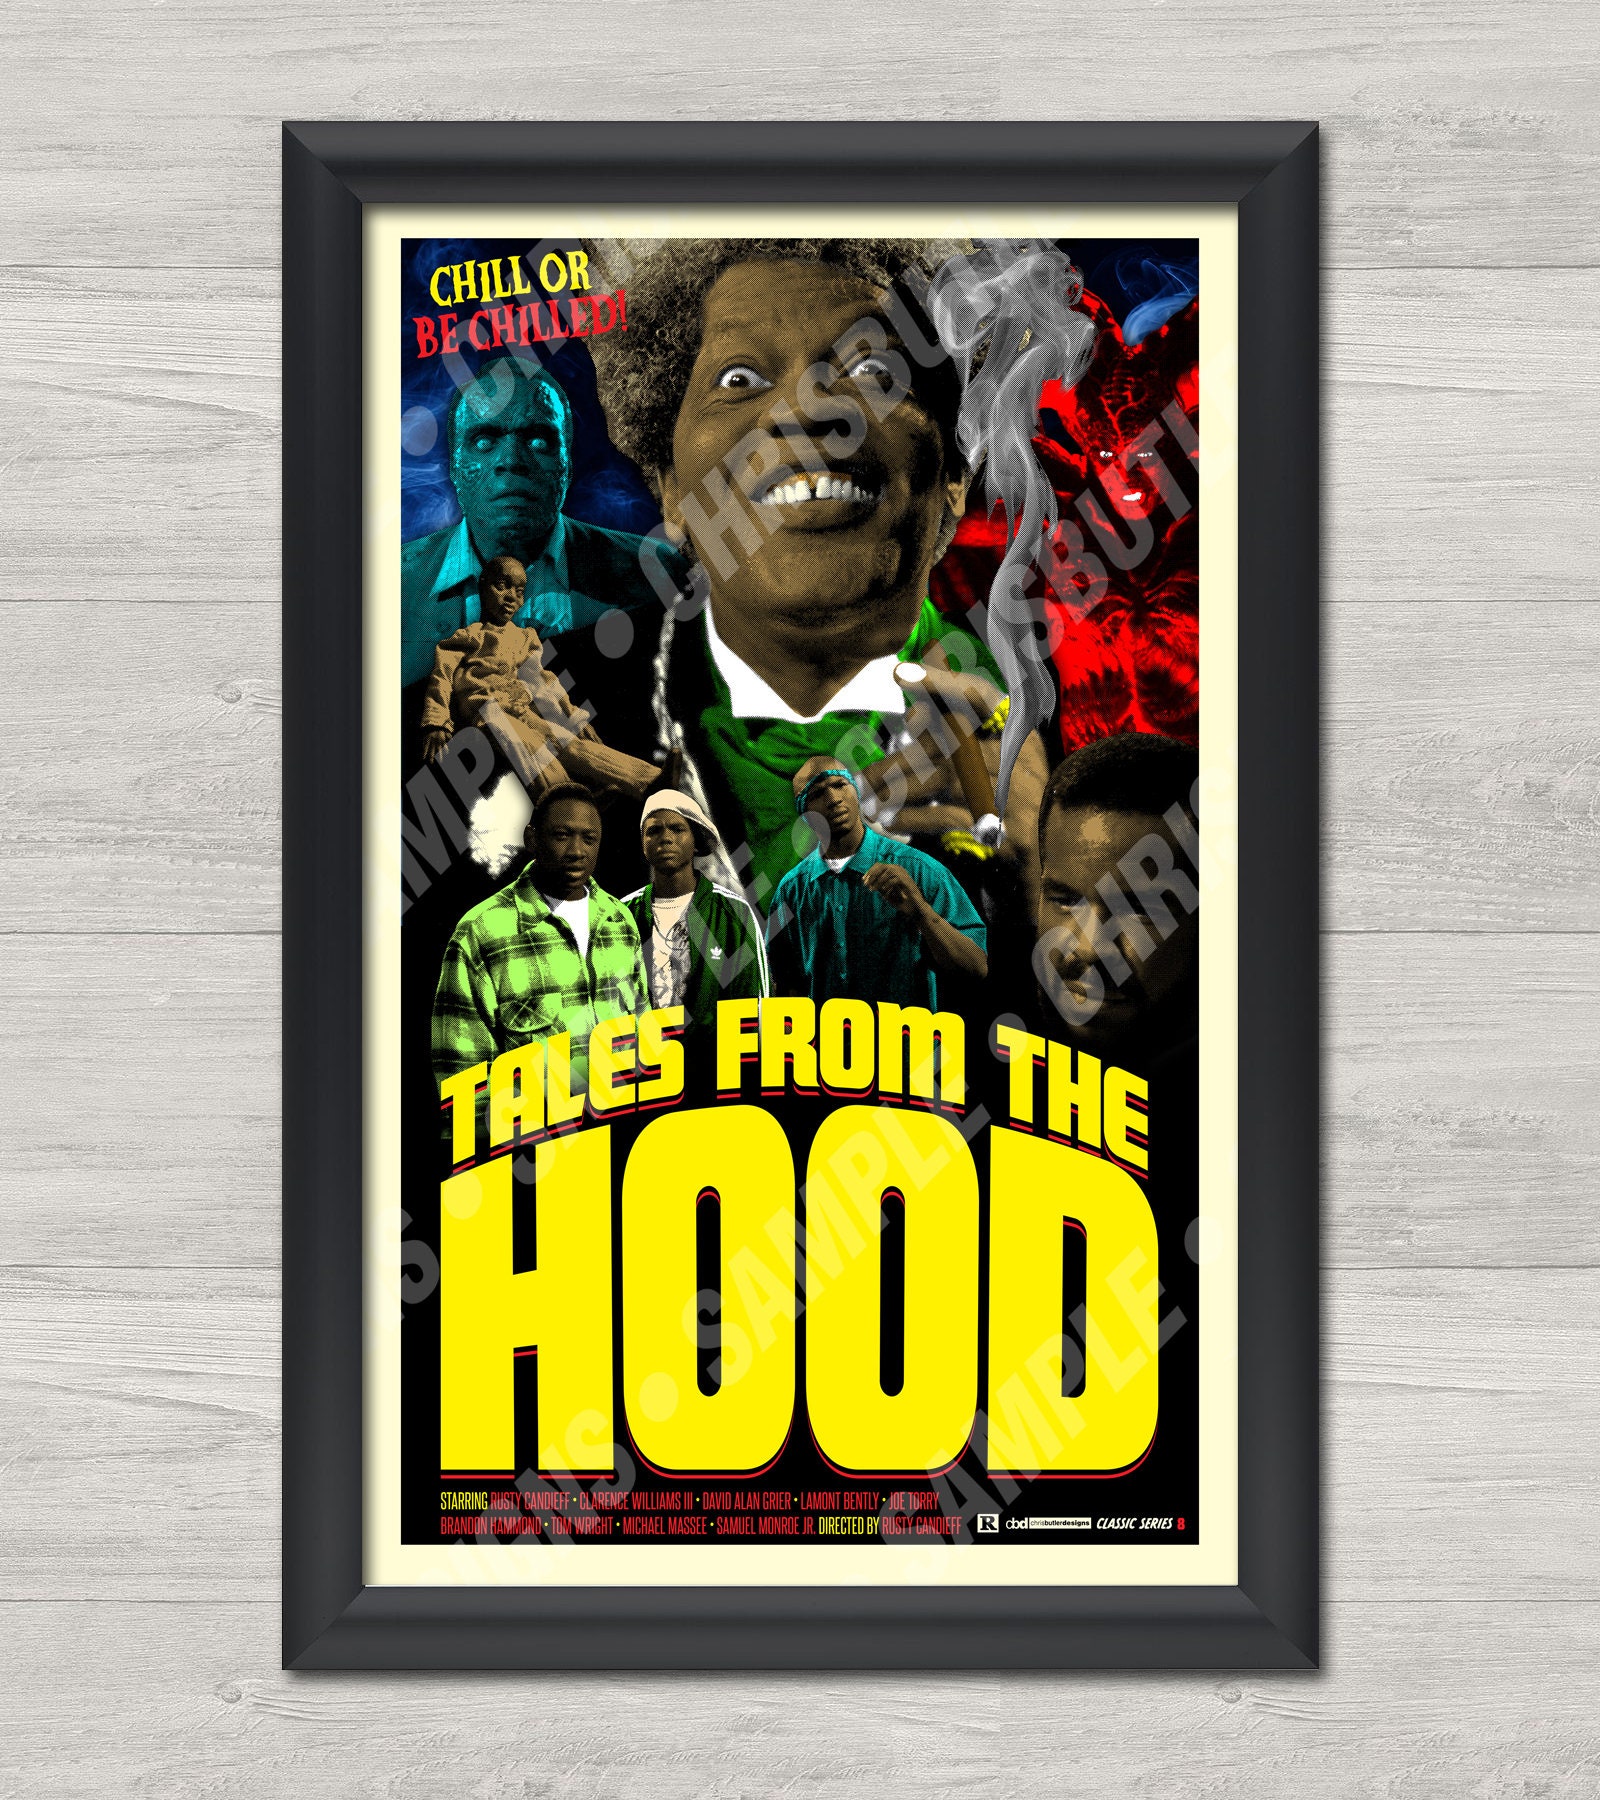 alison hanks recommends tales from the hood full pic